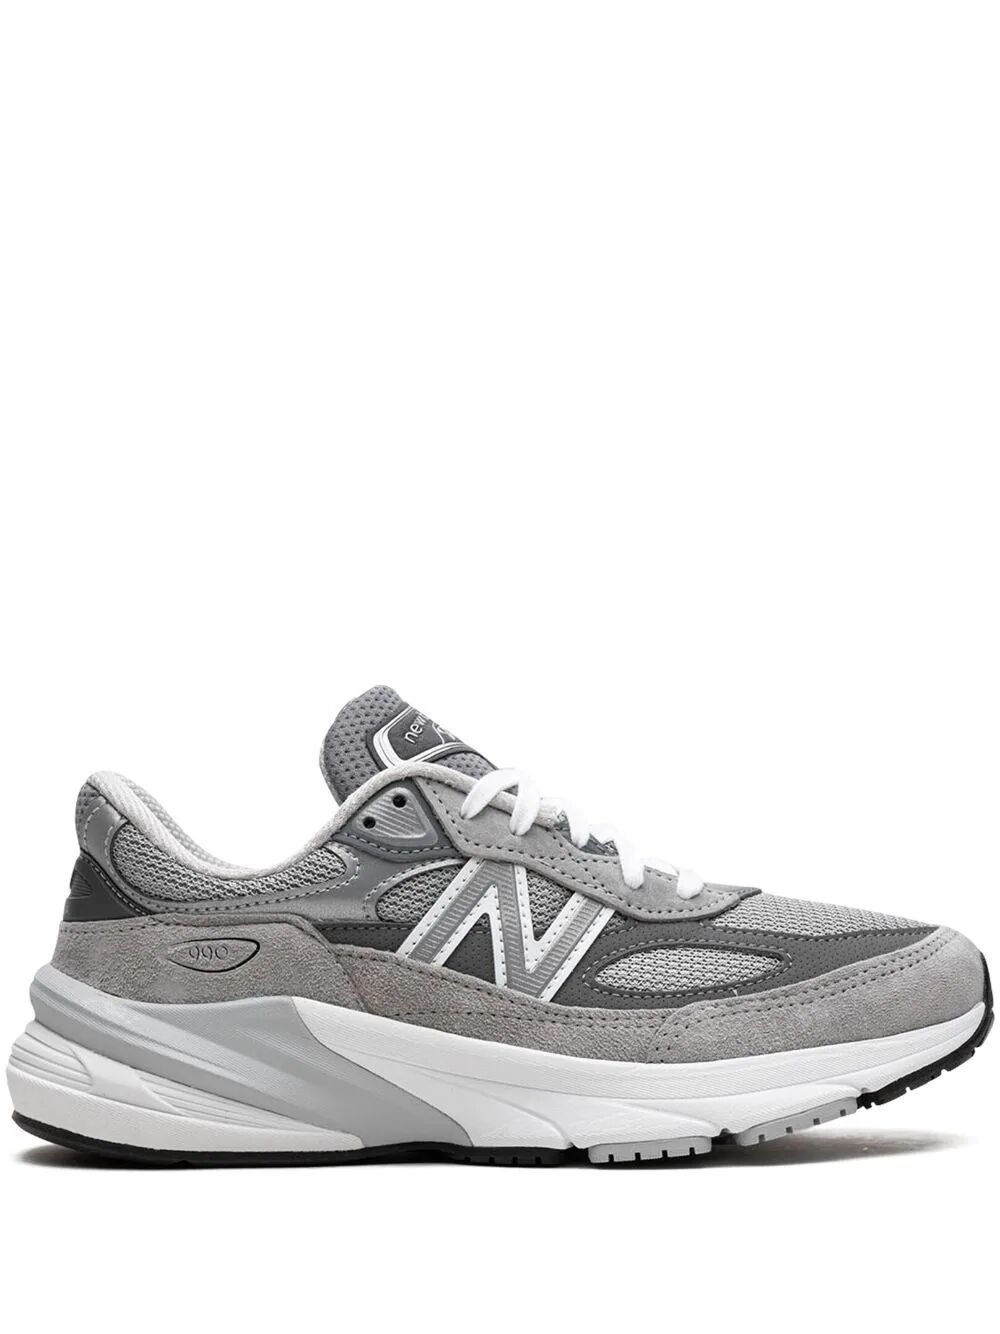 990V6 NEW BALANCE SNEAKERS - 1